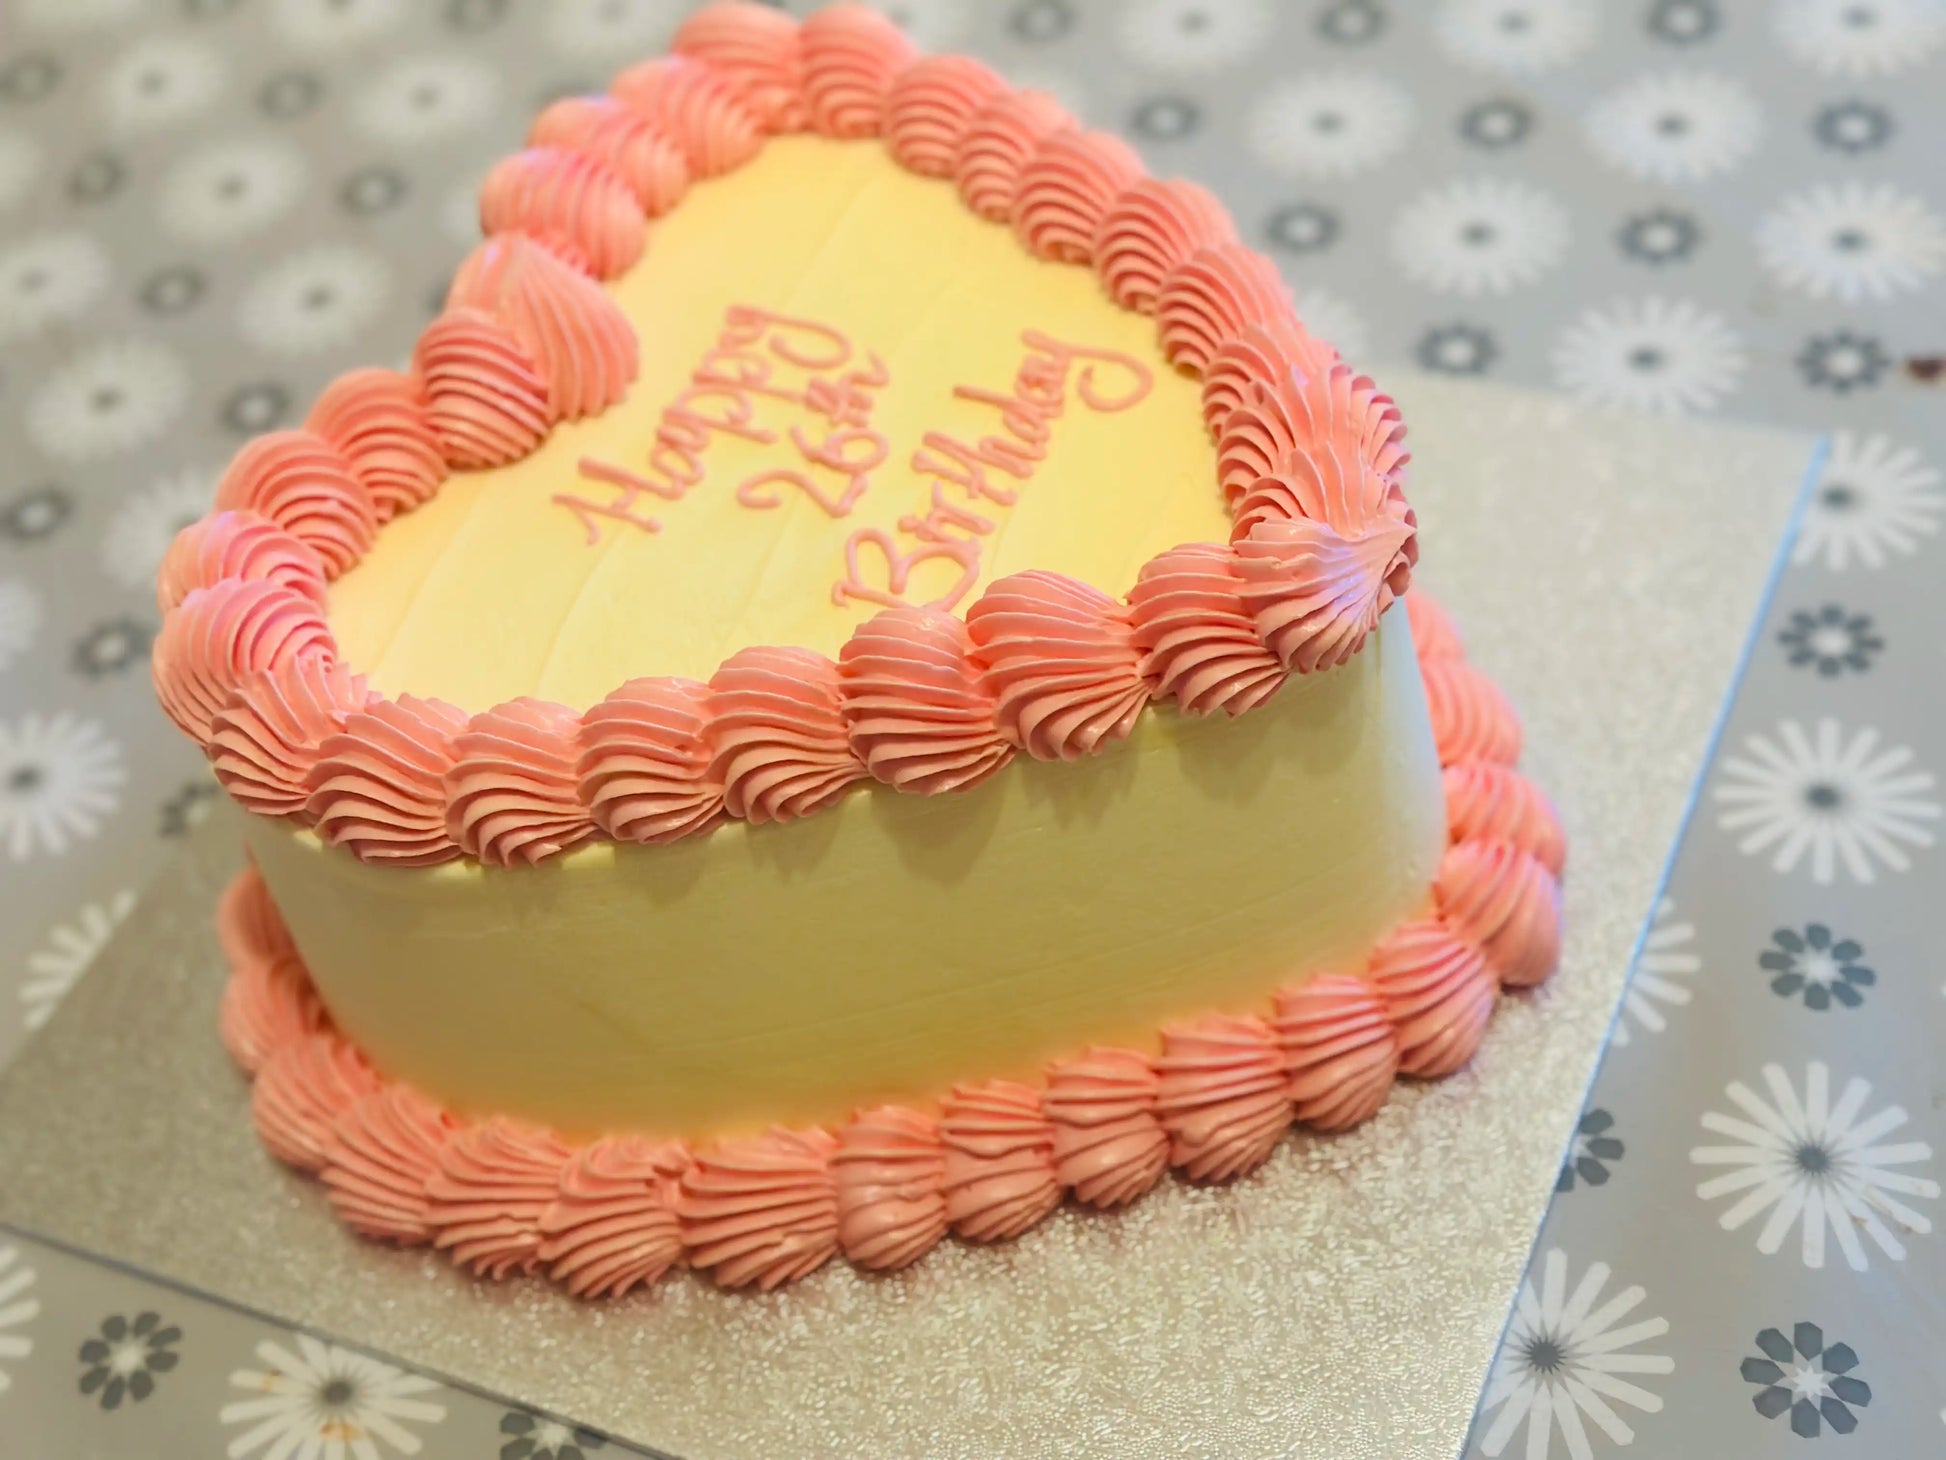 Heart cake with elegant gold leaf detailing, perfect for engagements and weddings, from CakeTrays.co.uk.